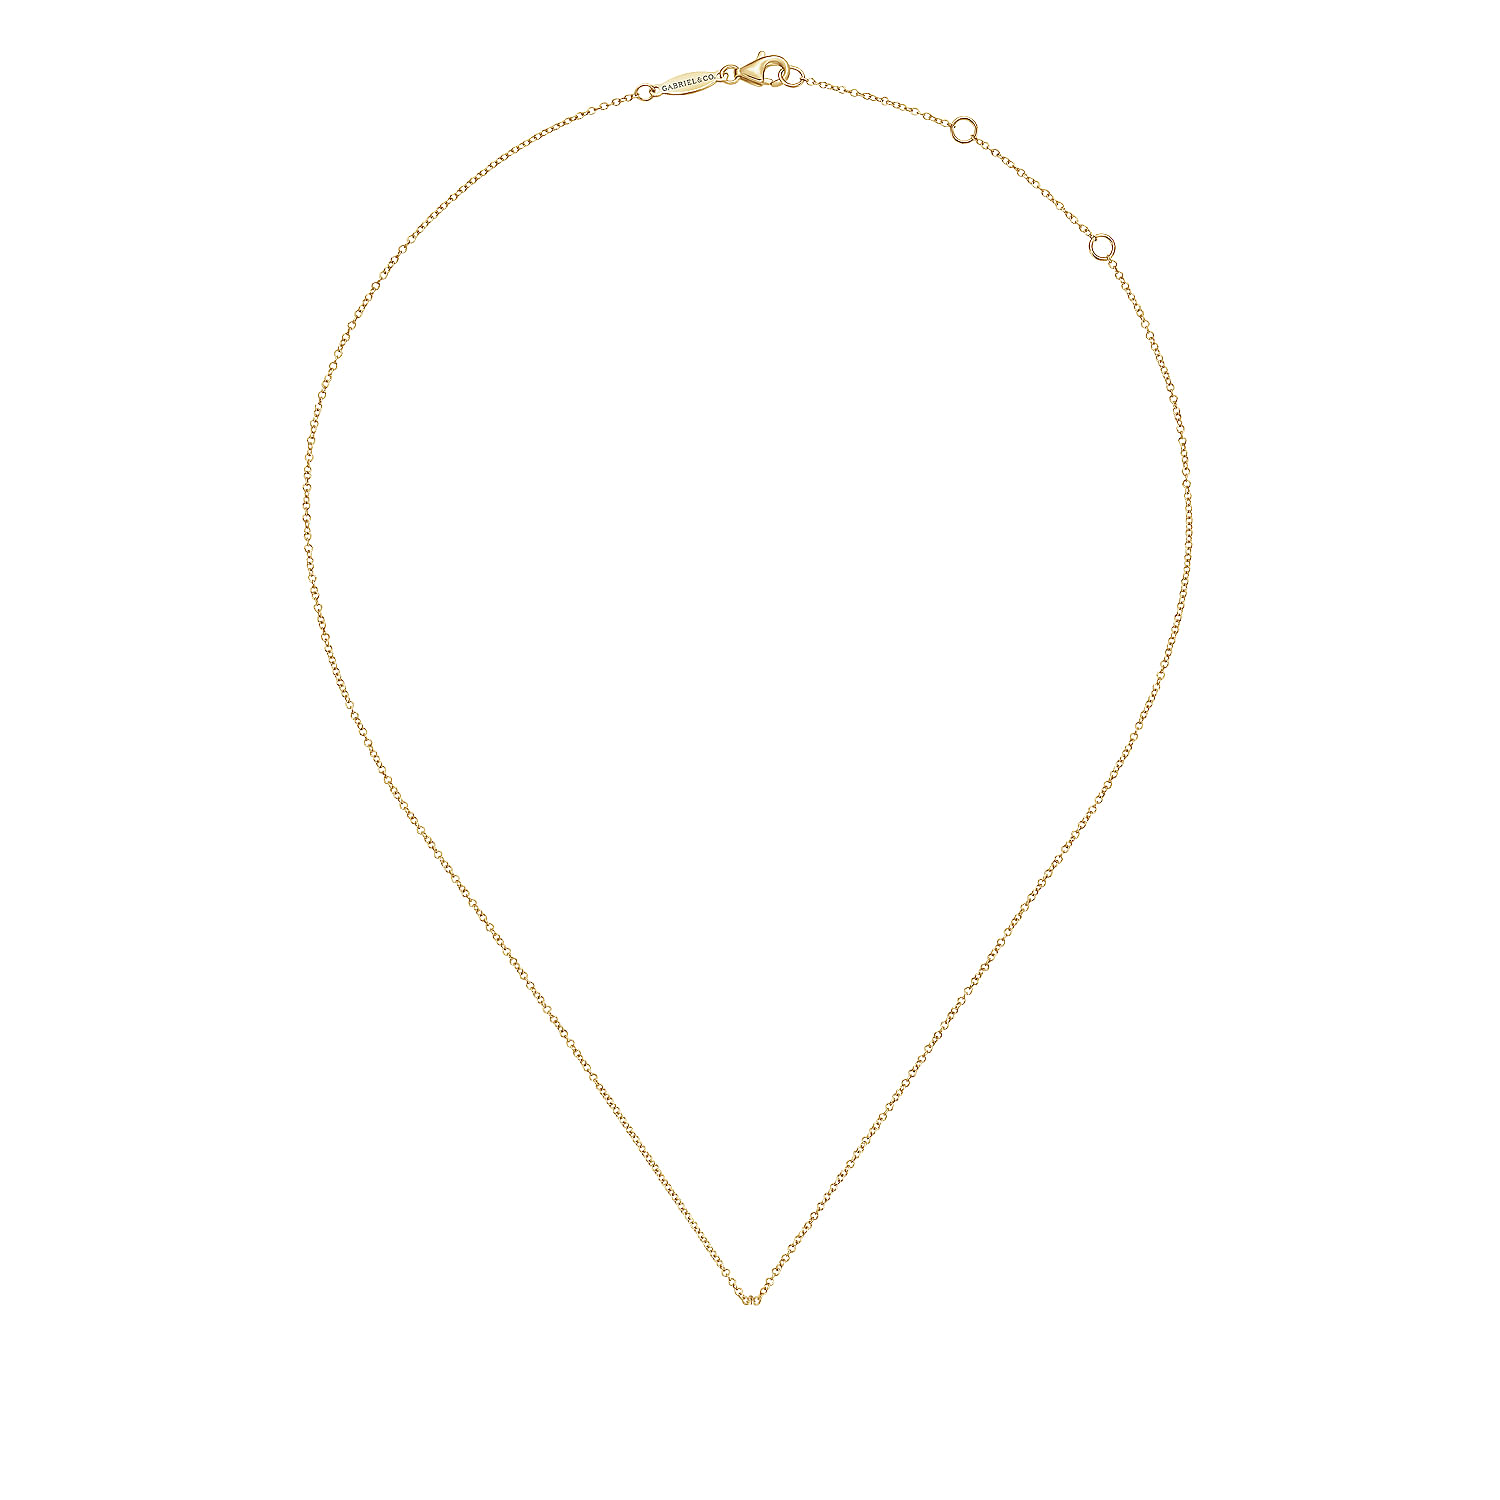 14K Yellow Gold Teardrop Diamond Pave Pendant Necklace with Beaded Frame